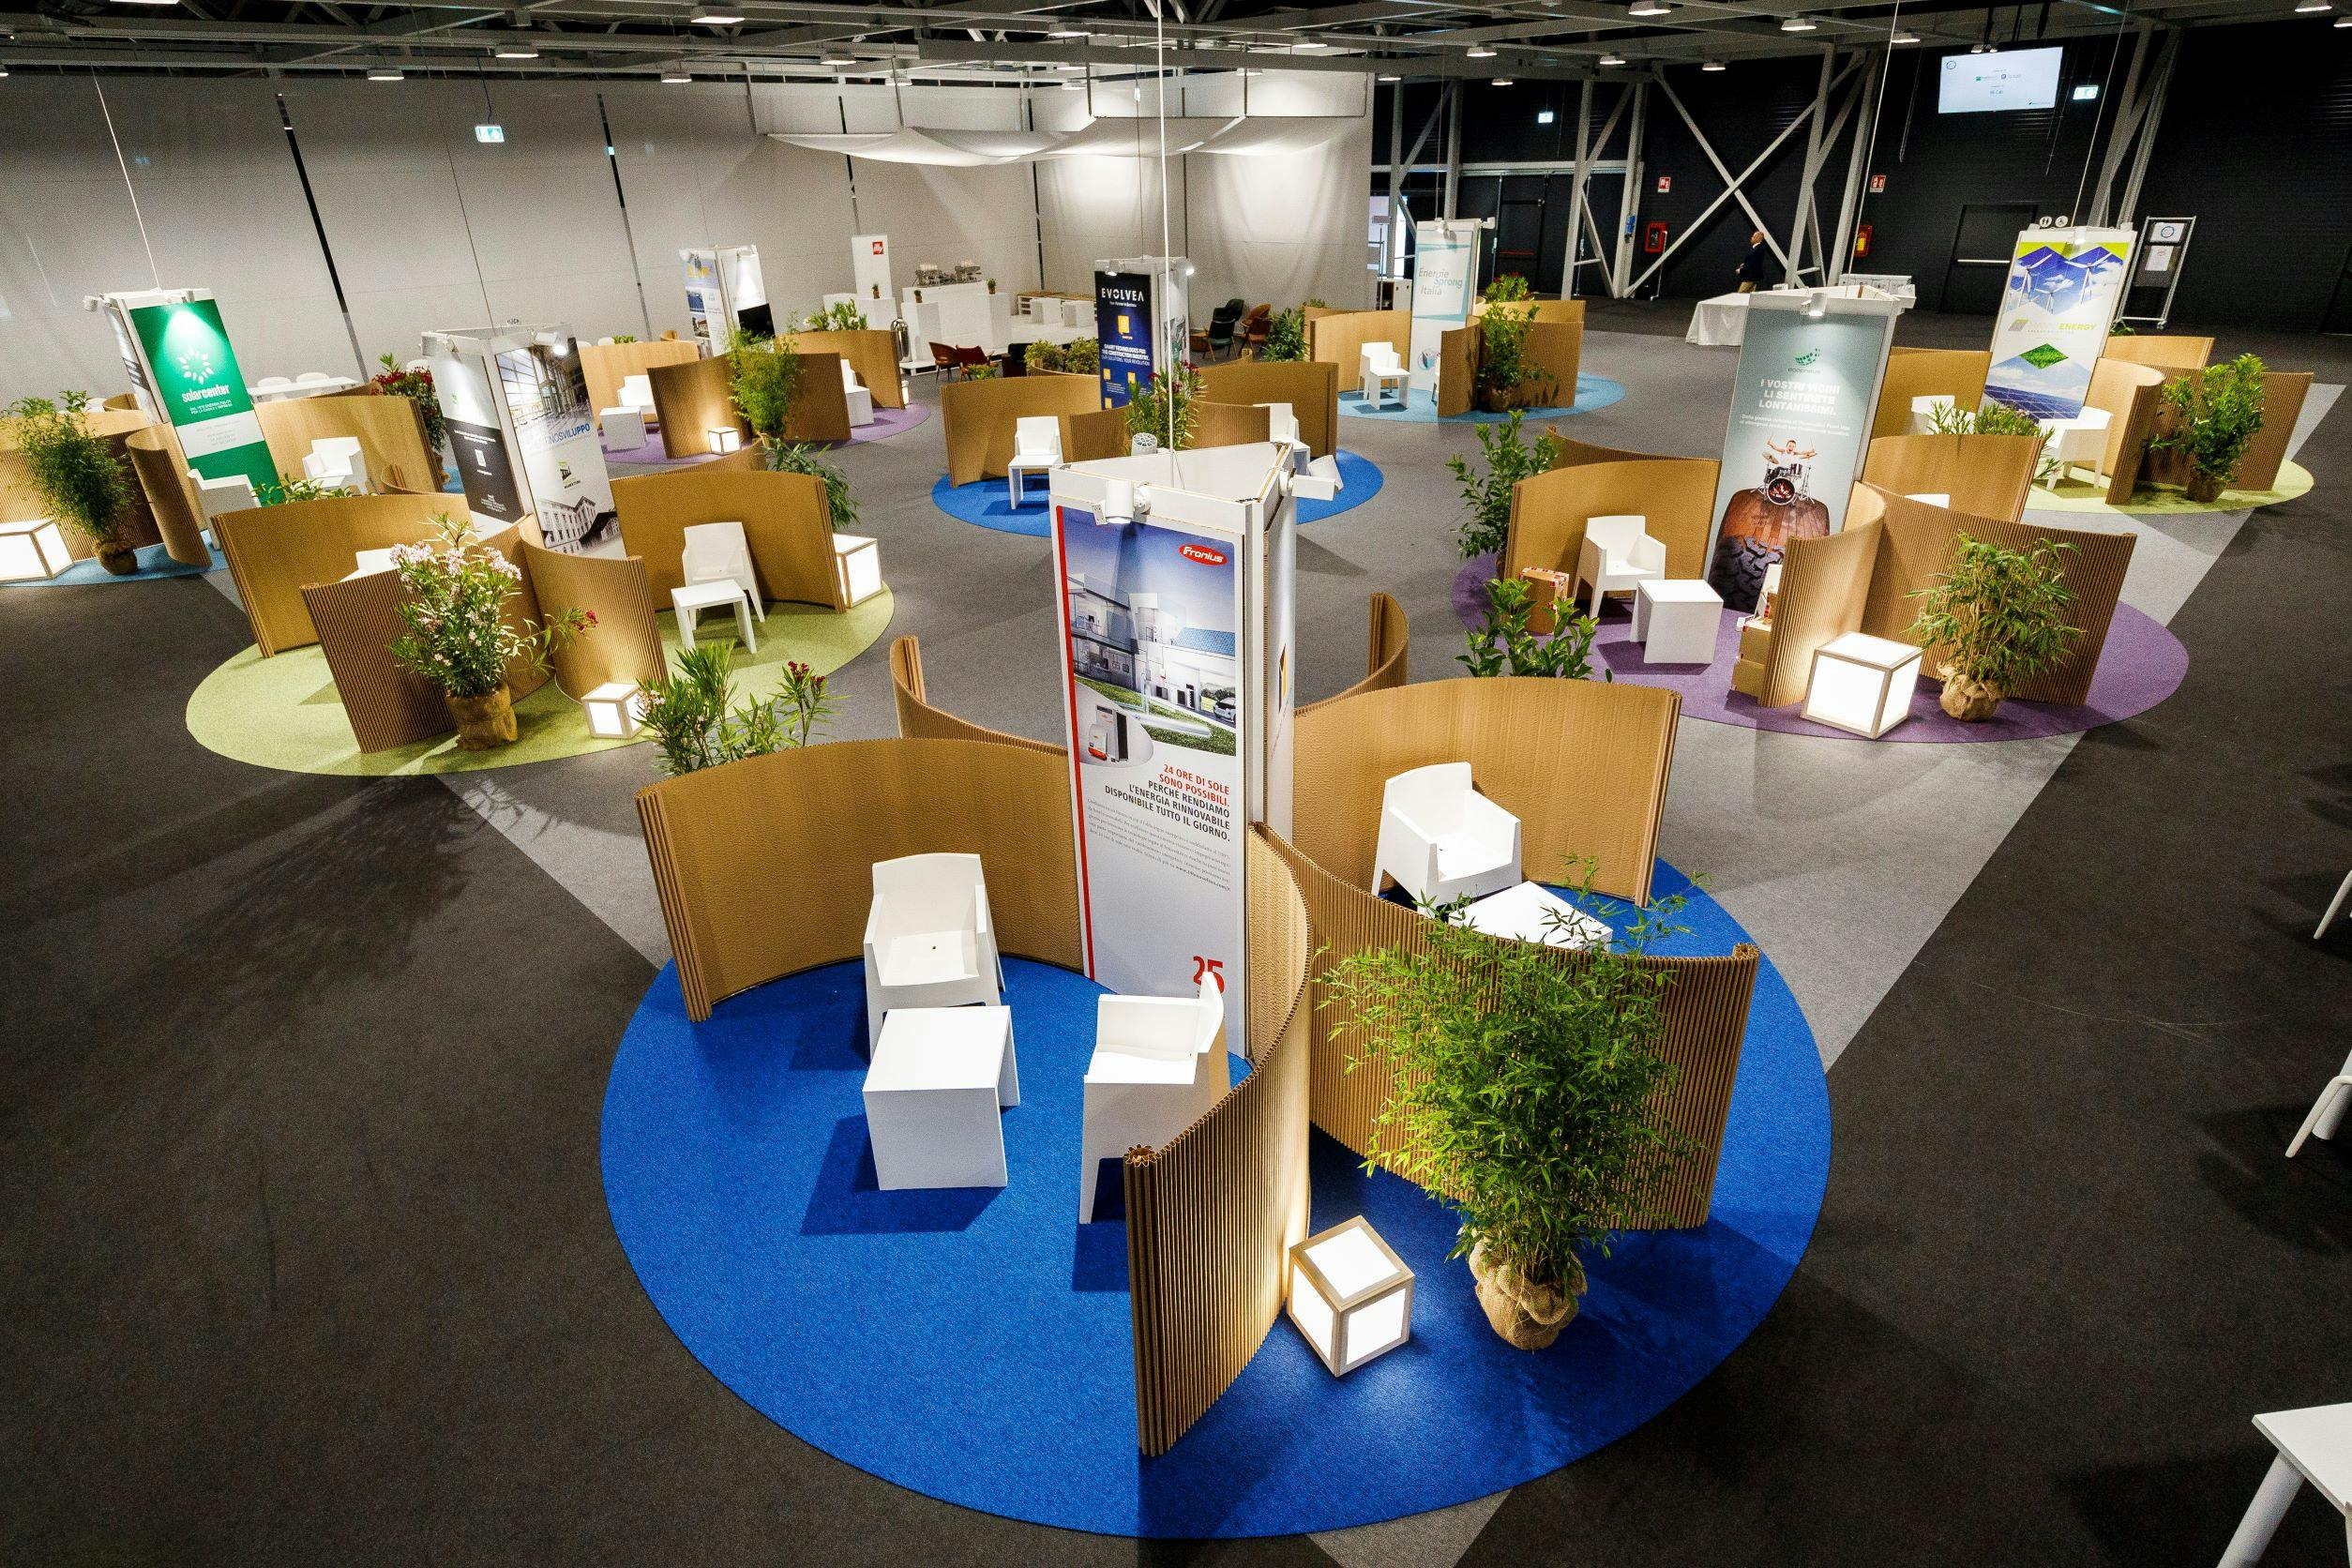 Exhibition hall with plants and stands